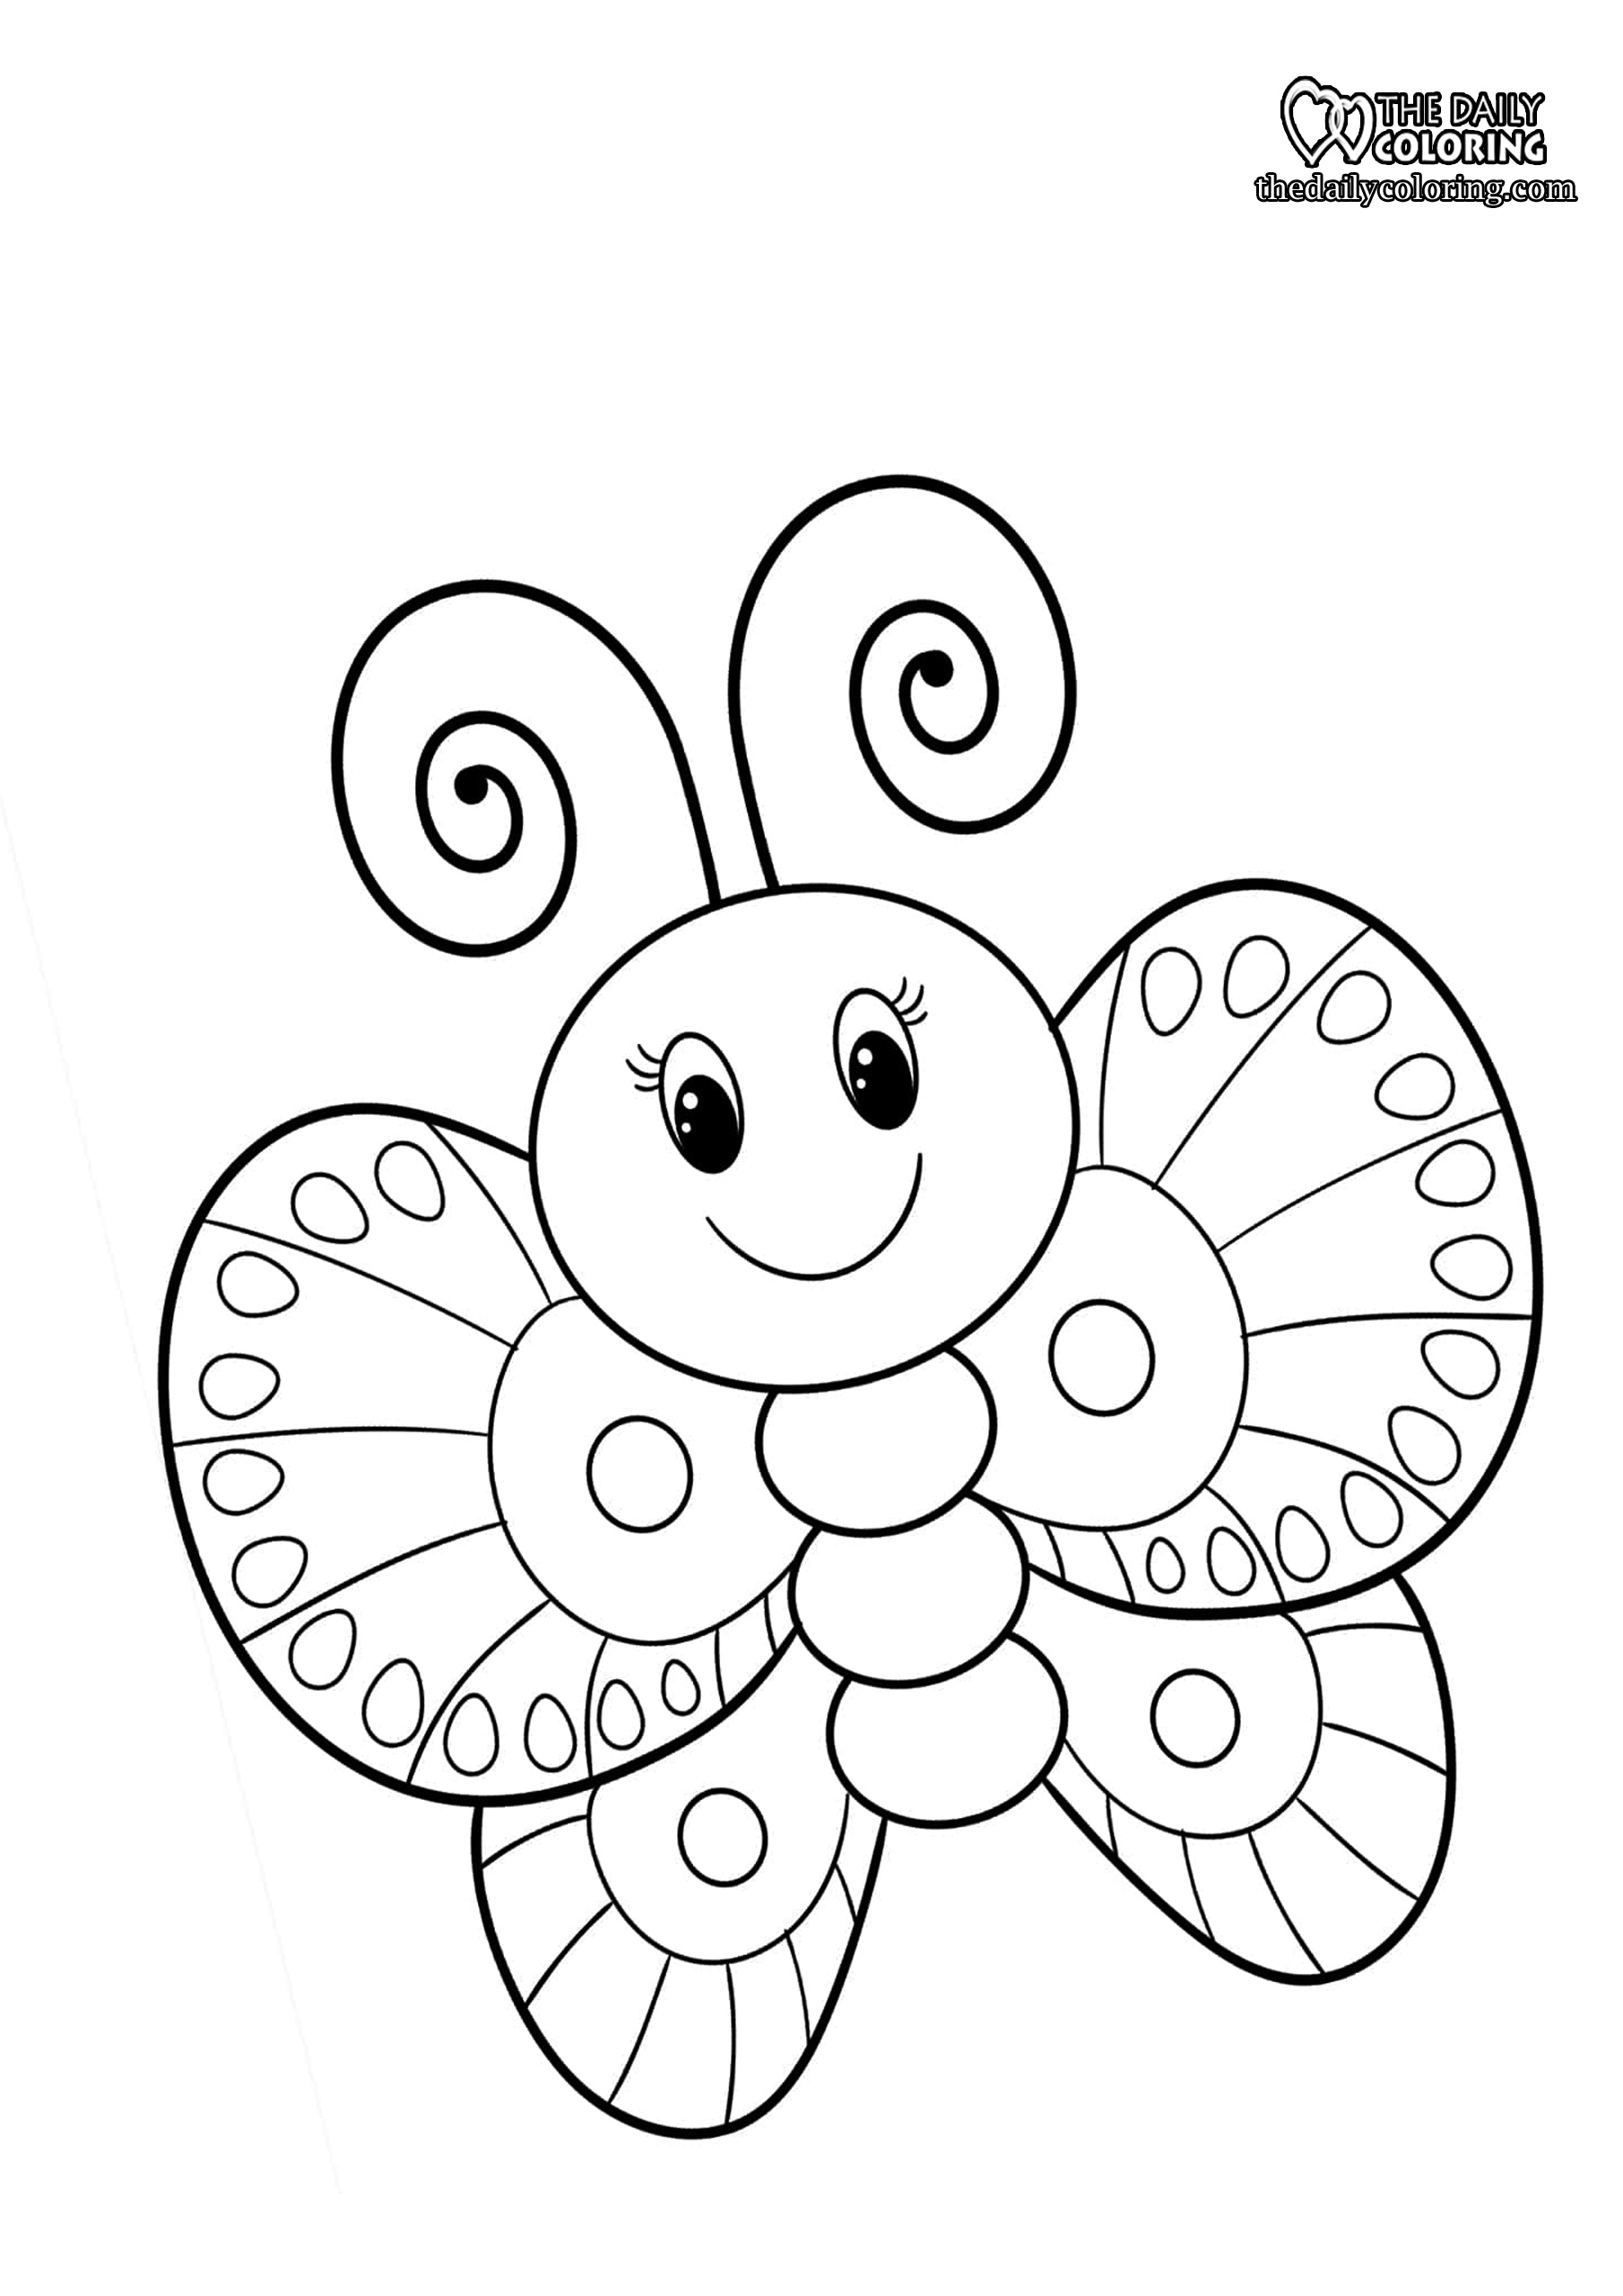 Butterfly Coloring Pages   The Daily Coloring